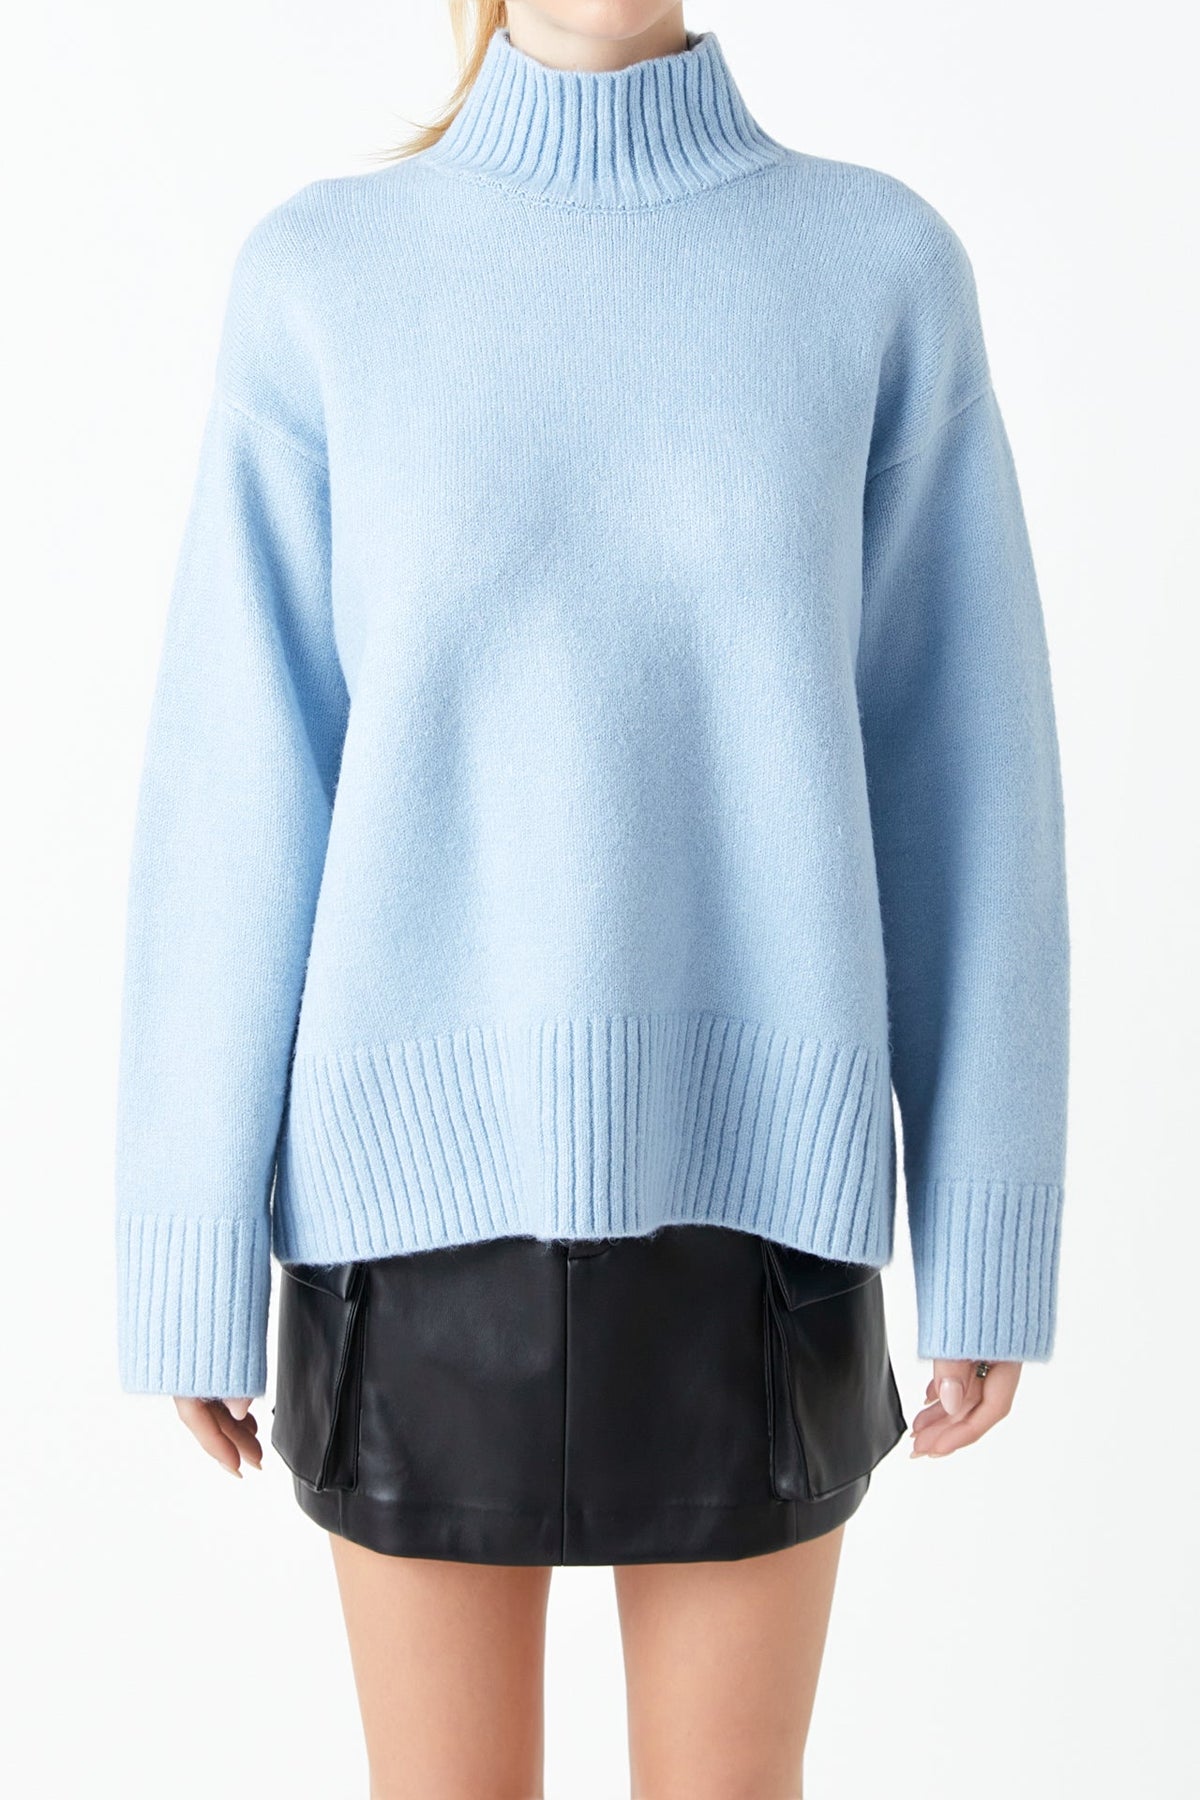 GREY LAB - Turtle Neck Sweater - SWEATERS & KNITS available at Objectrare